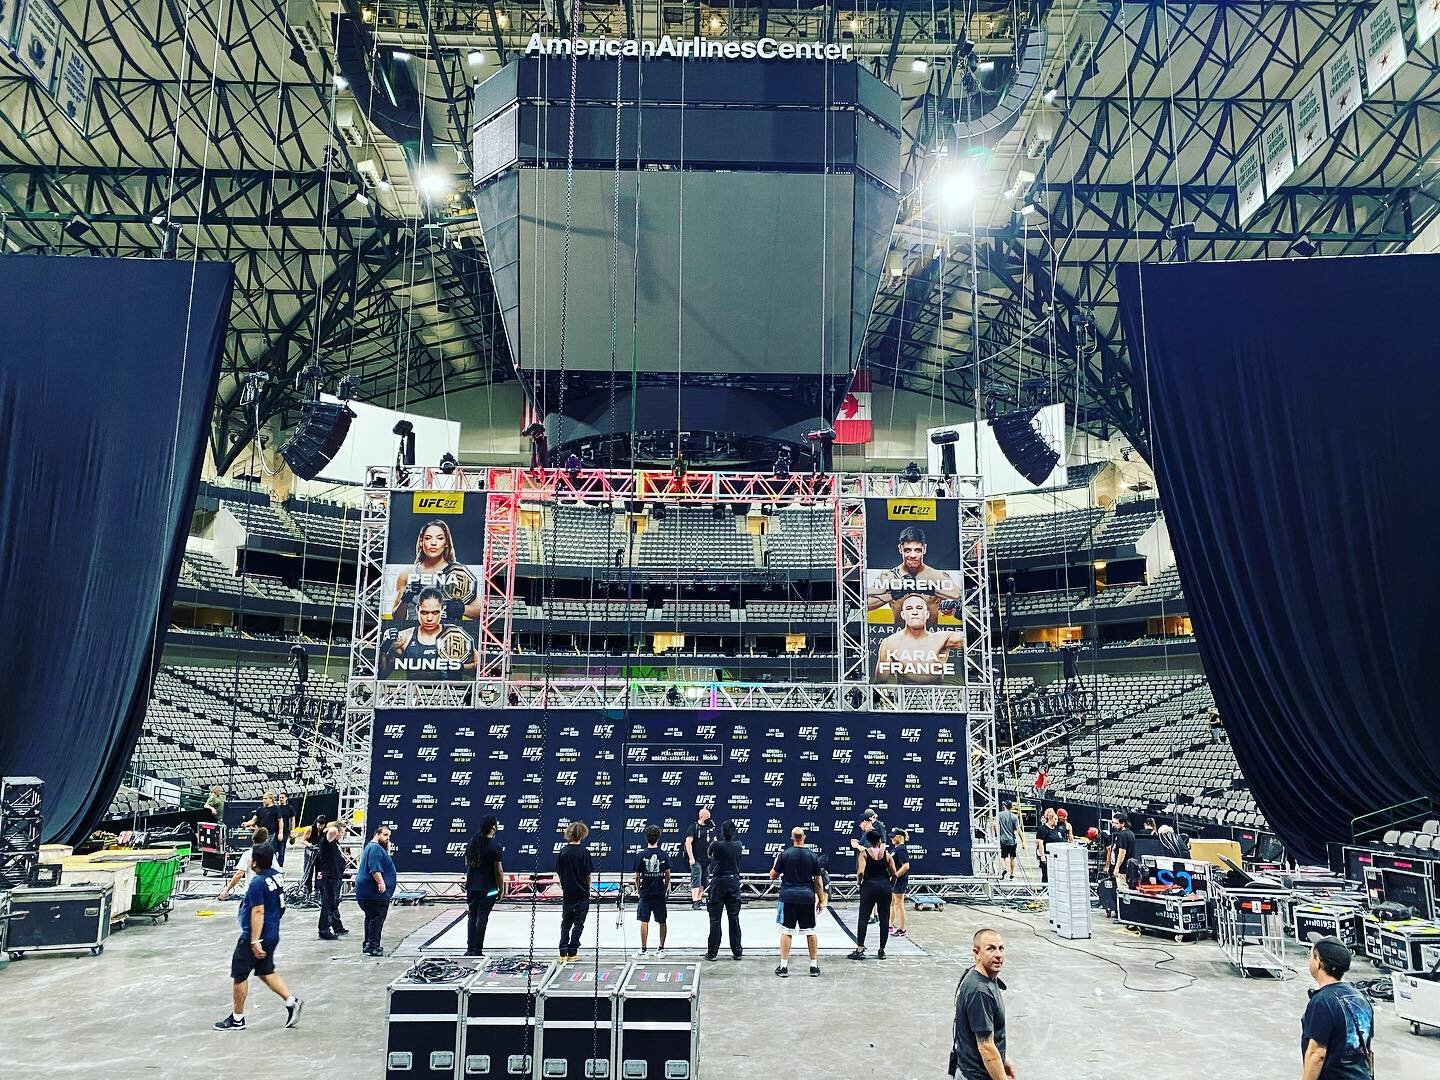 #UFC277 Press Conference at @aacenter in Dallas.  Looked awesome yesterday!!! #concominc @ufc 

#thetotalproductioncompany #concom_inc #productioncompany #production #broadcast  #remotebroadcast #jib #setup #rigging #video #crew #liveevents #lighting